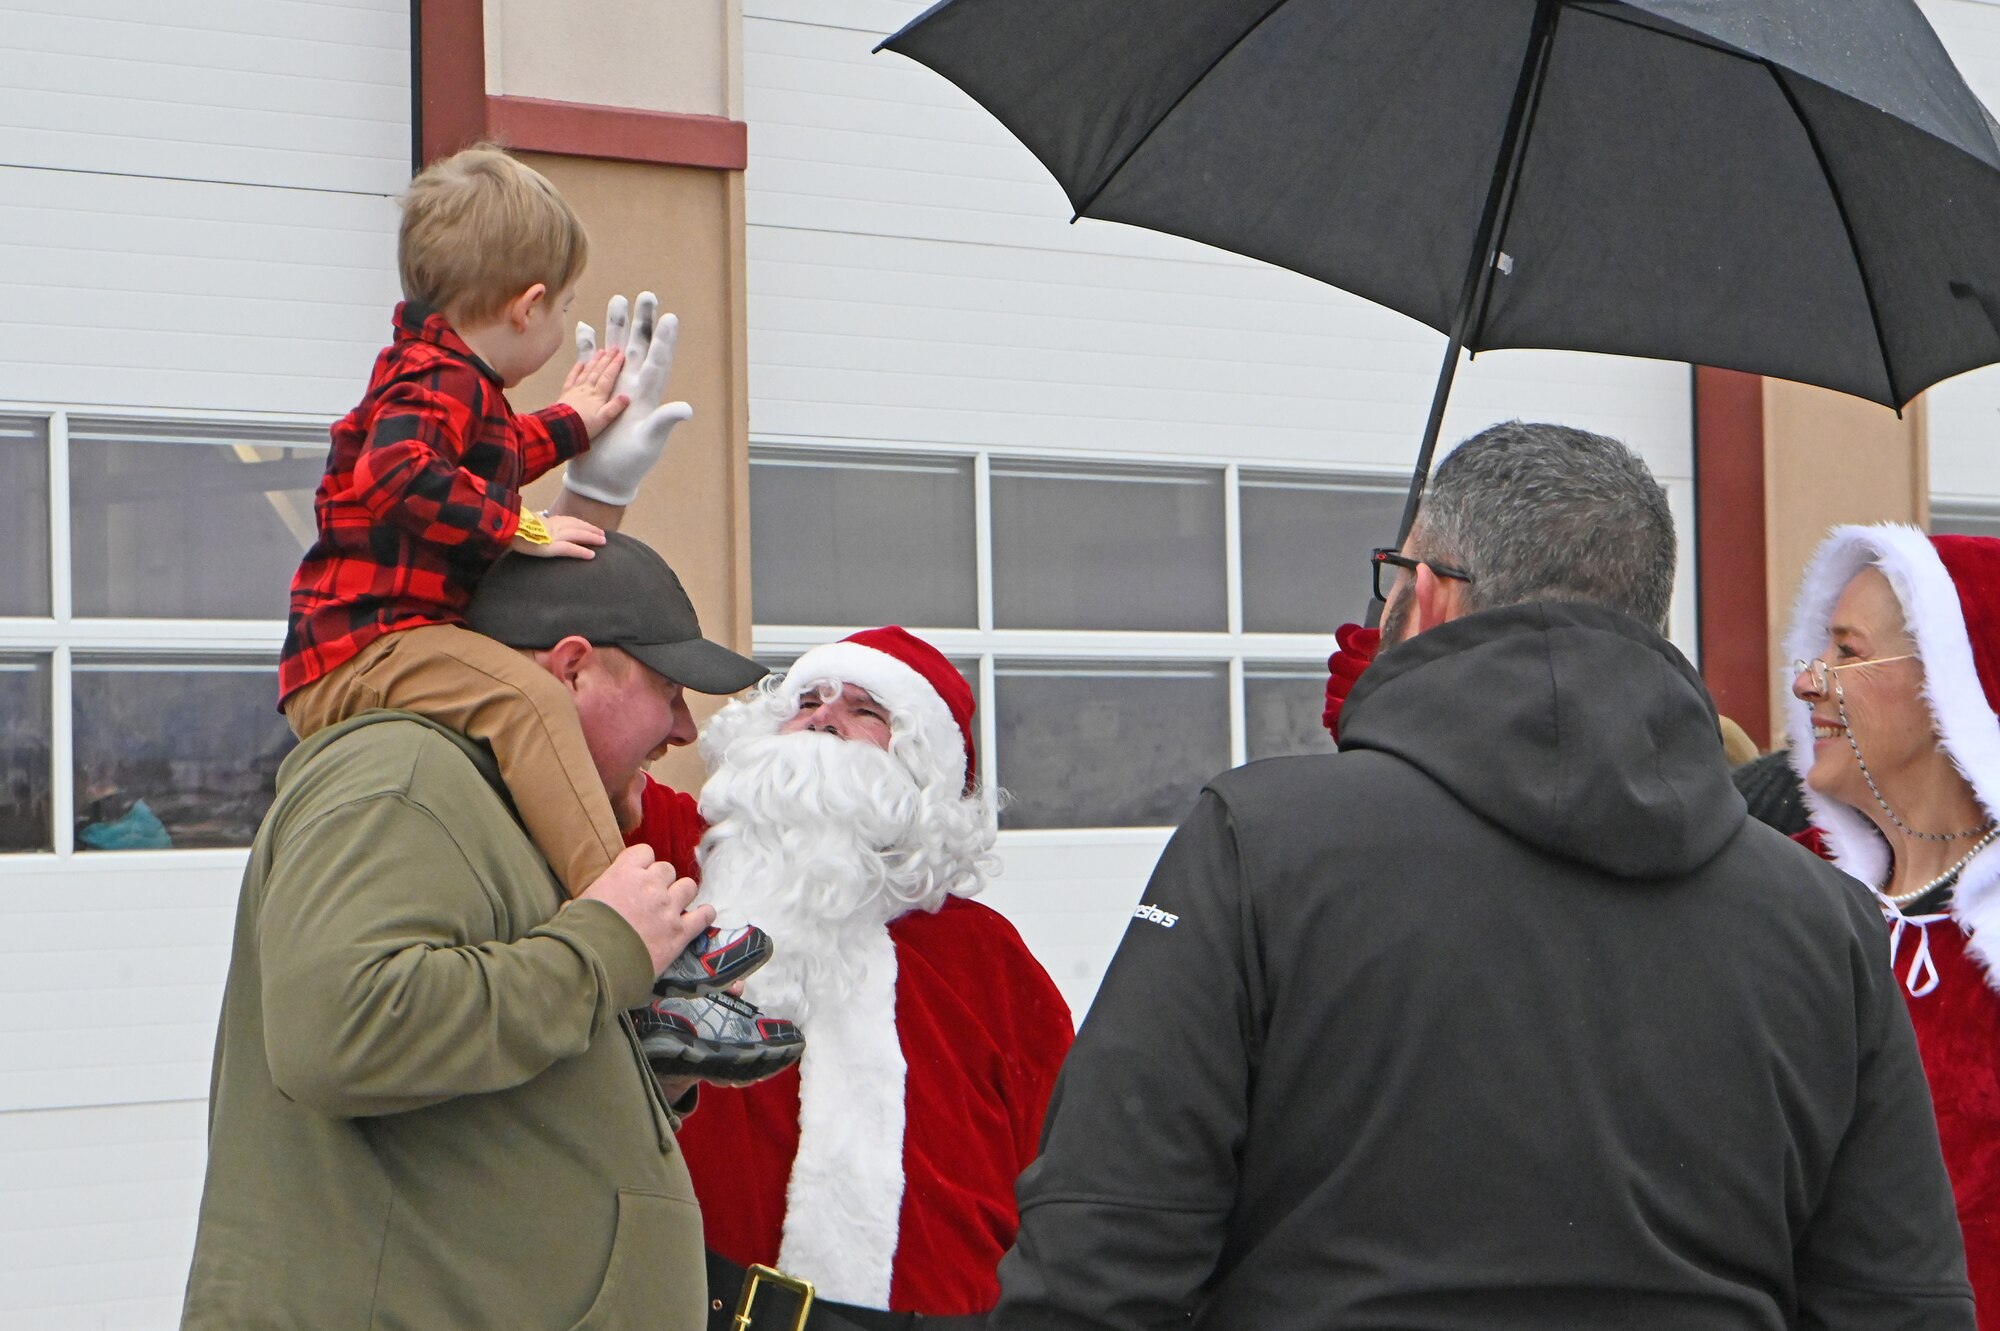 Santa reaches up to high five an excited child during the annual Children's Christmas Festival on Kingsley Field.